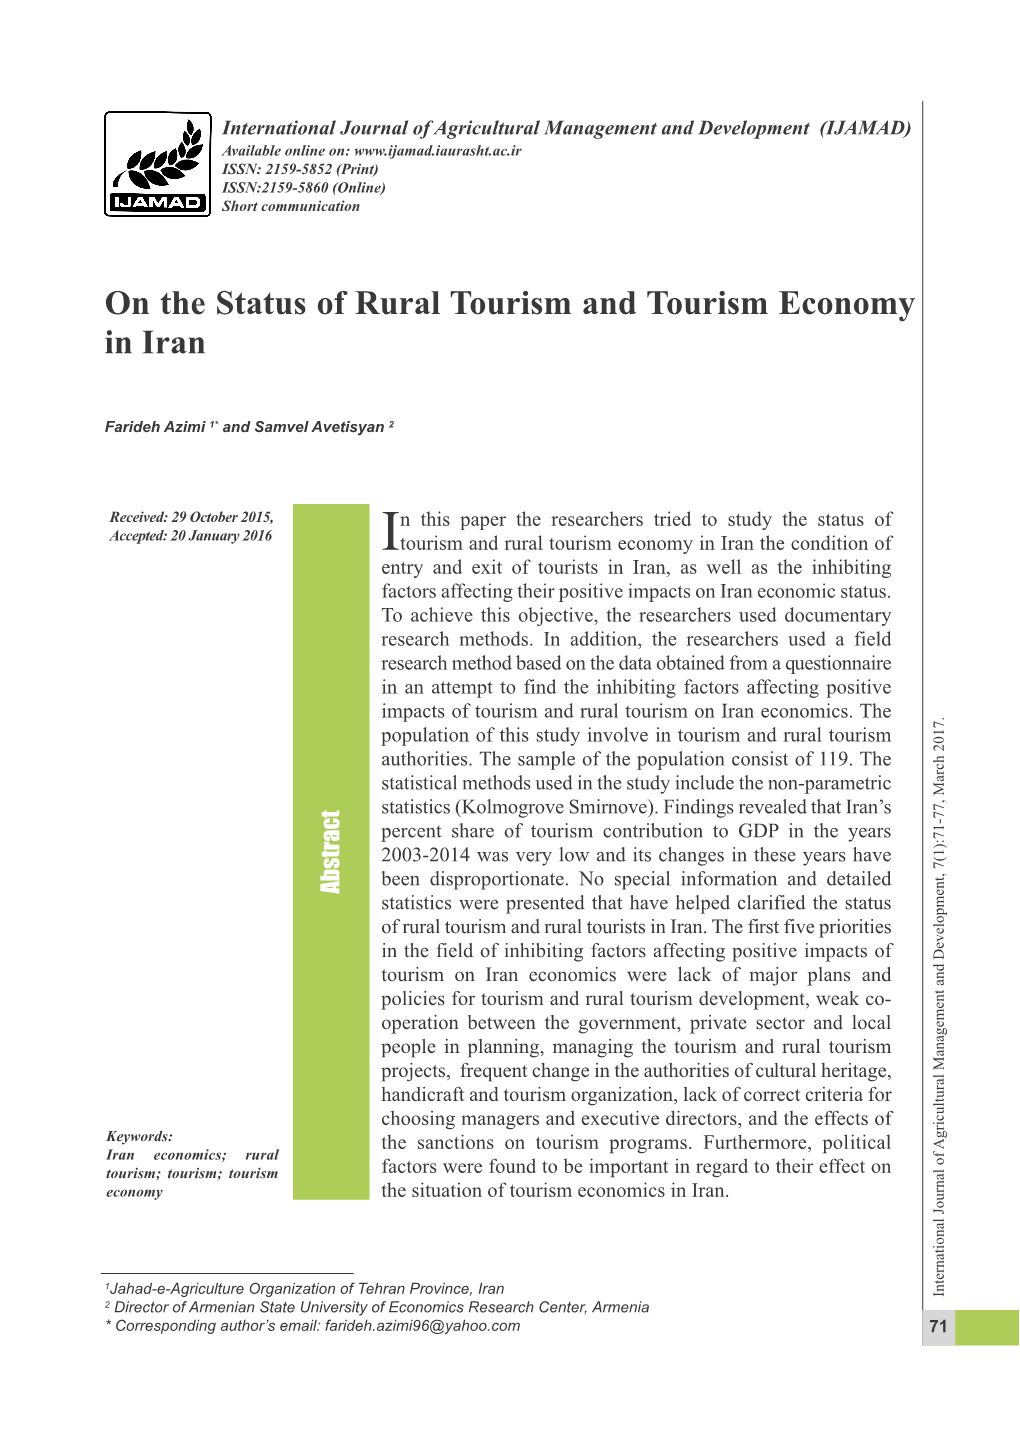 On the Status of Rural Tourism and Tourism Economy in Iran